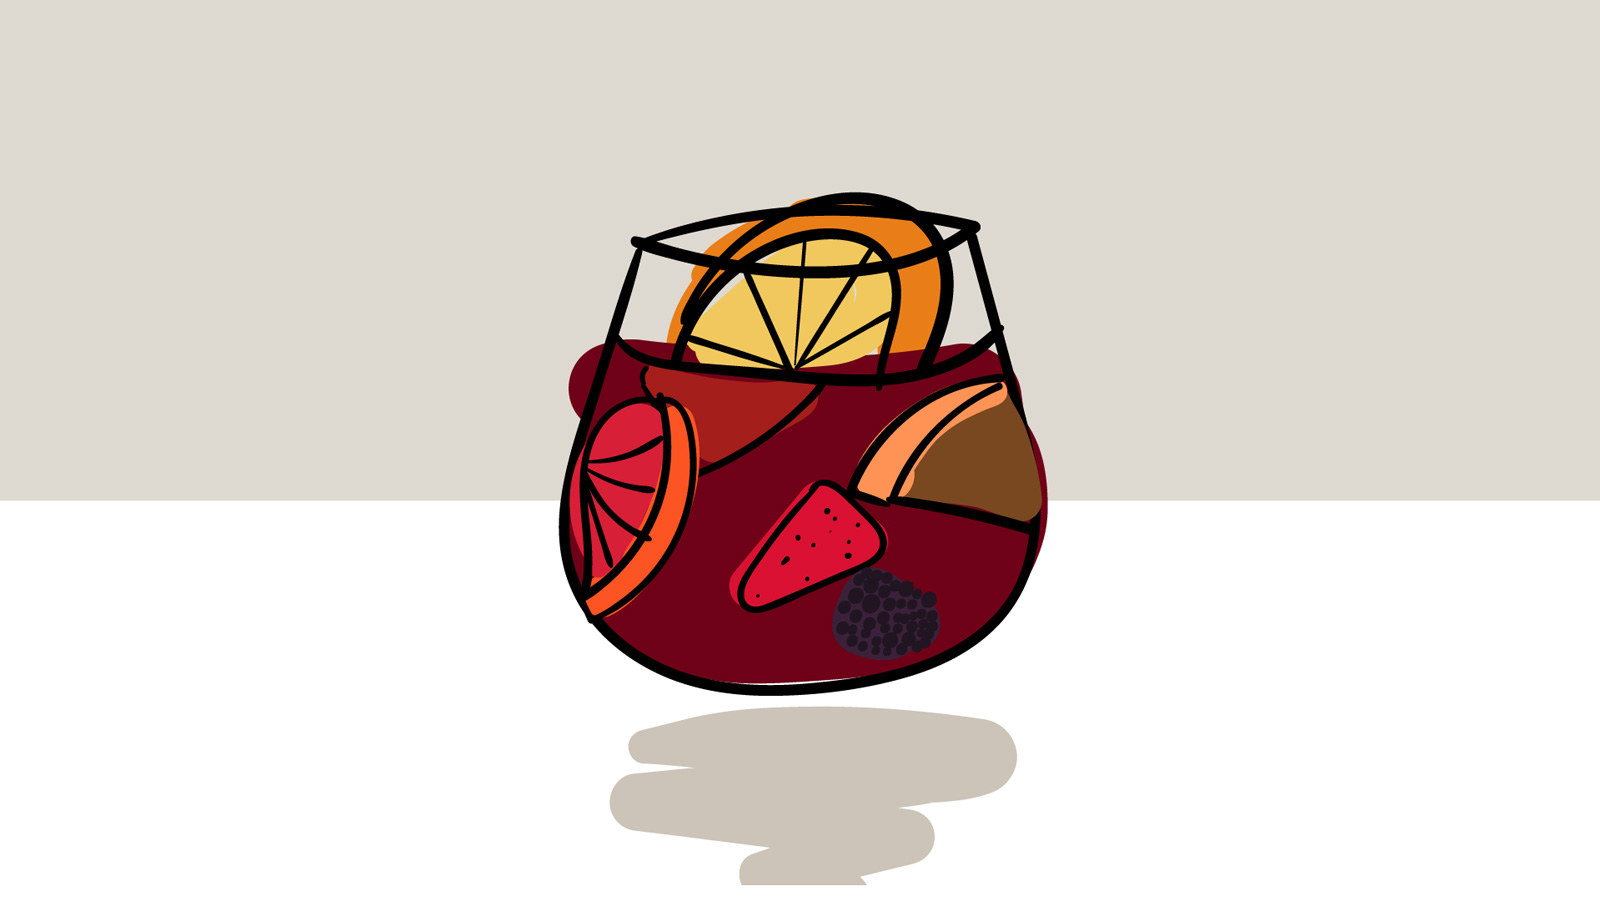 A Sangria cocktail representing Spain in Eurovision Song Contest